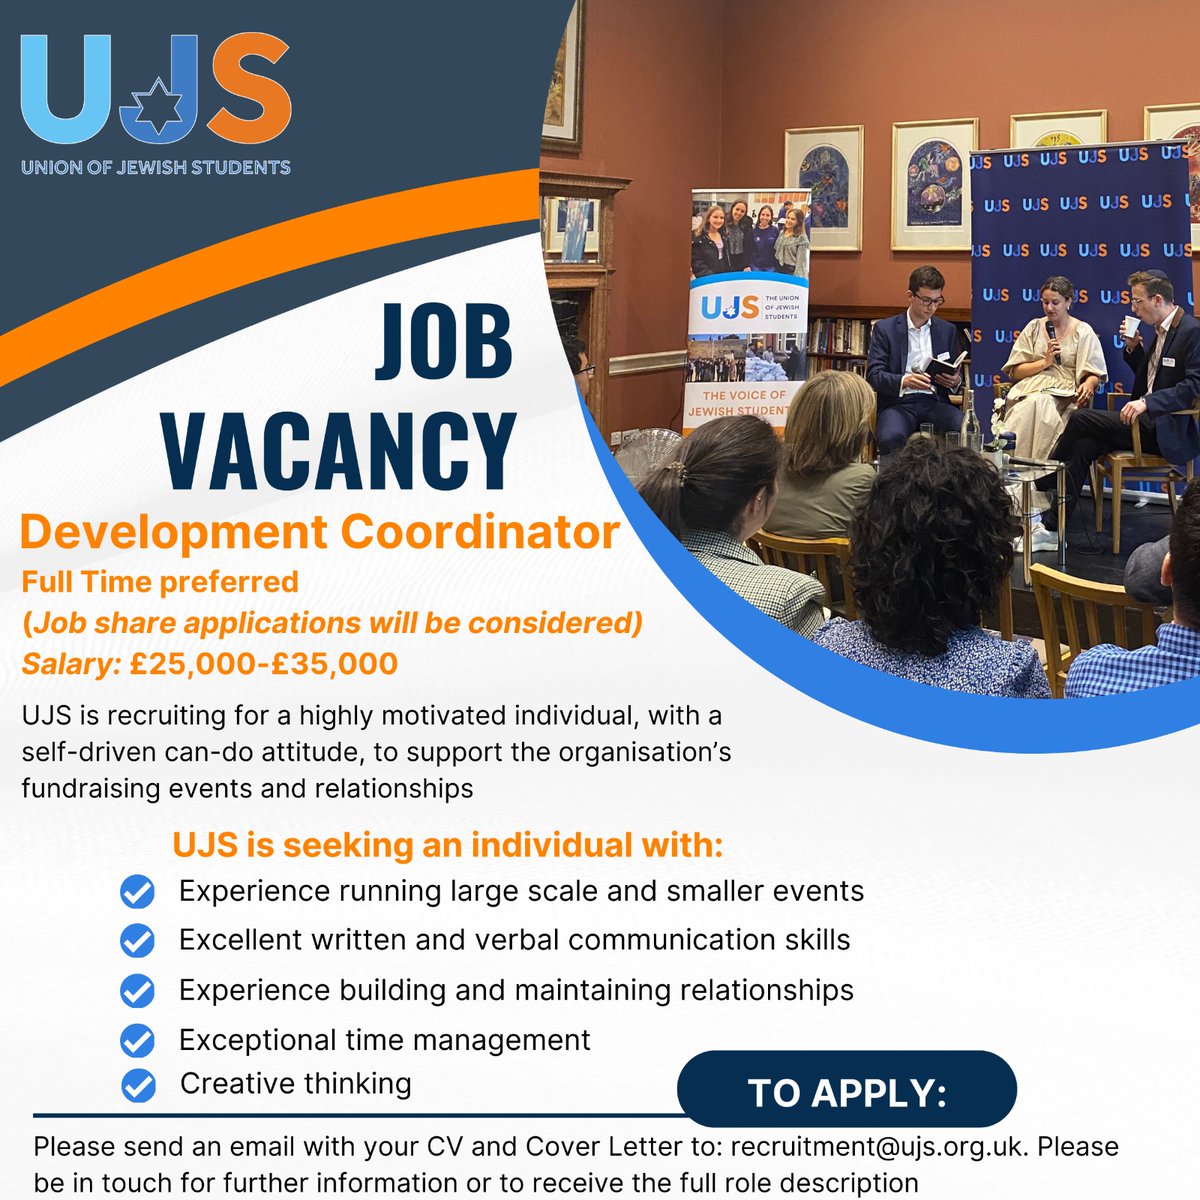 📣We’re Hiring for a Development Coordinator! See the post for all details. To apply email recruitment@ujs.org.uk with your CV and Cover Letter.